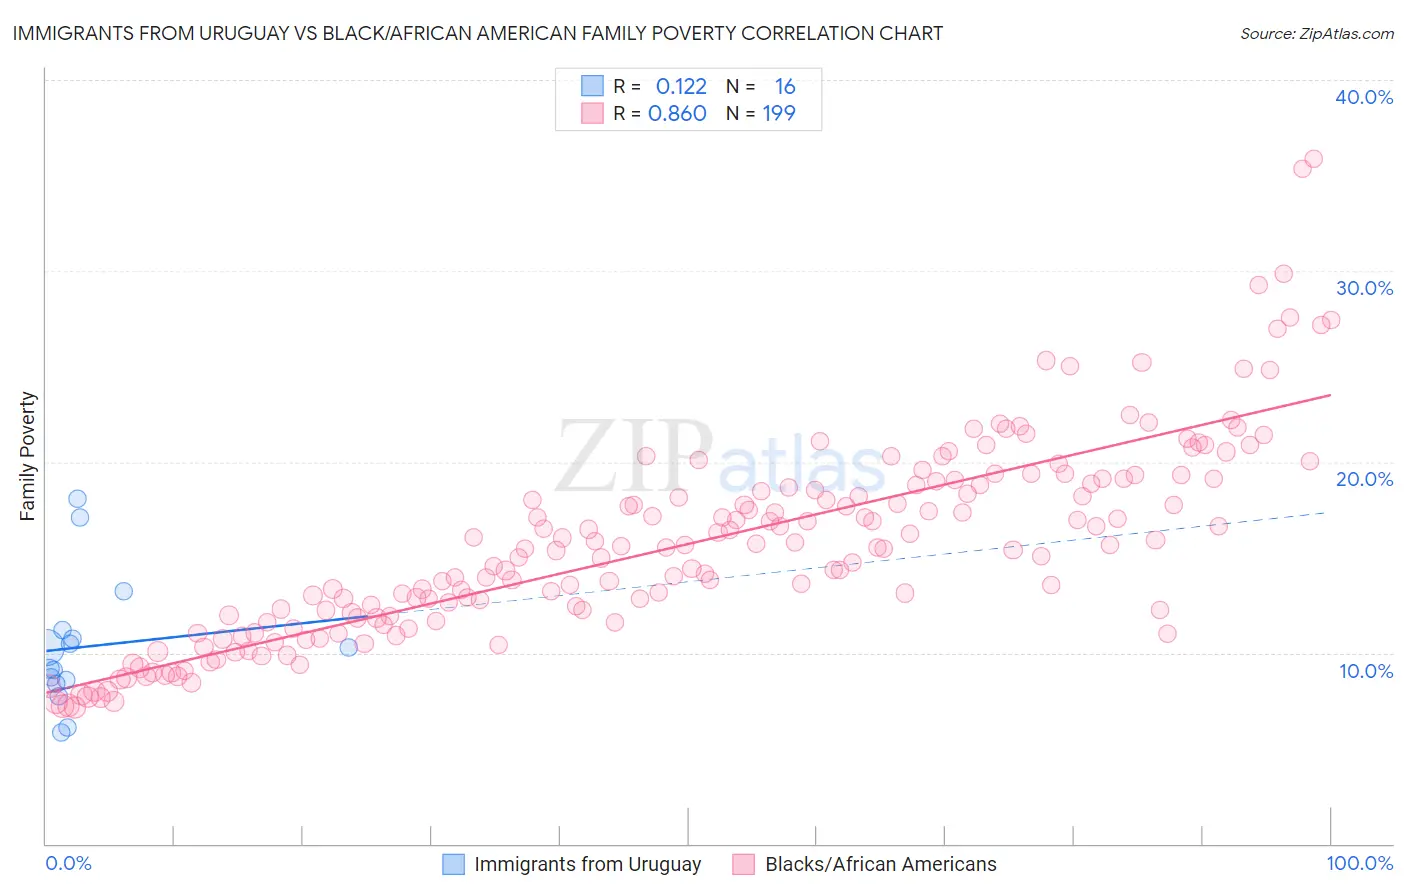 Immigrants from Uruguay vs Black/African American Family Poverty